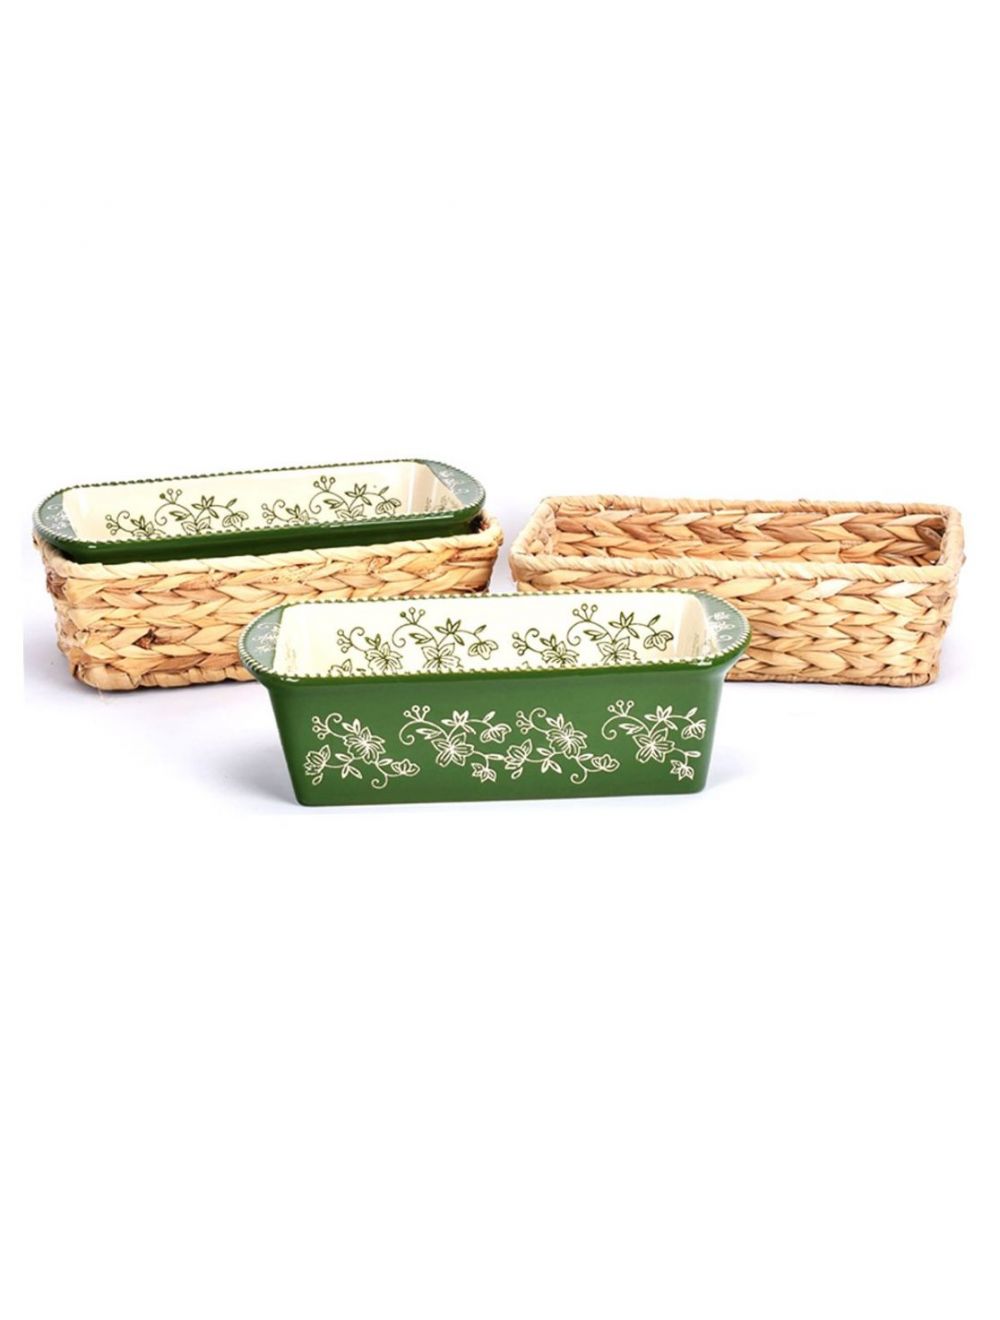 Temp-tations Floral Lace Loaf Pans in Baskets - 4 Piece -K50766-061